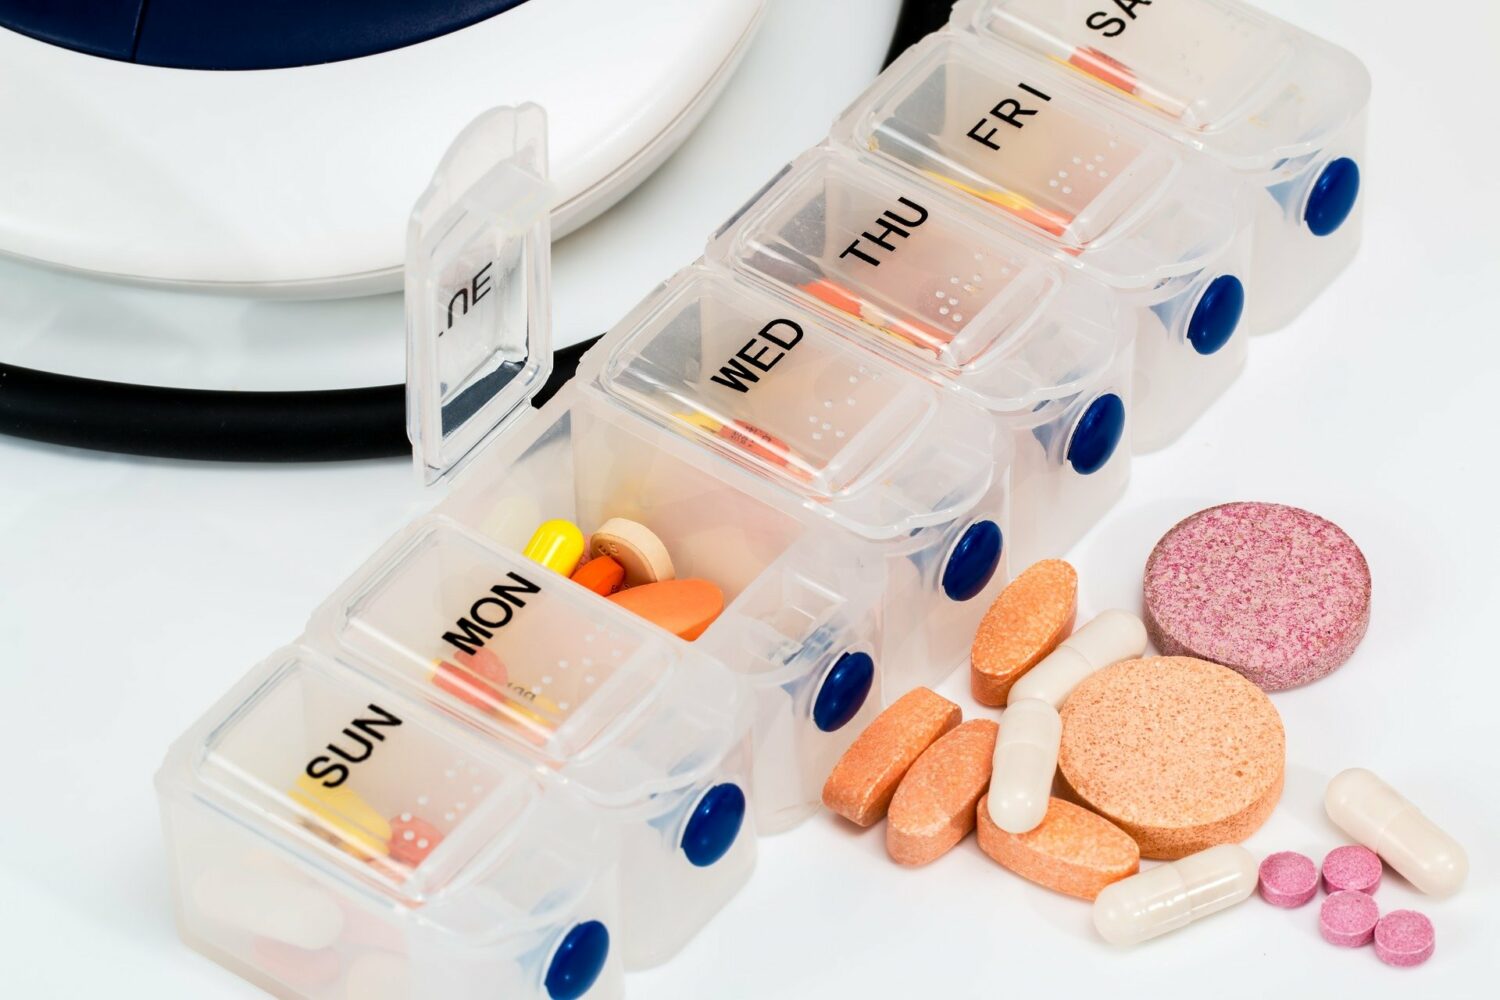 Nearly Half of Americans Have Experienced Challenges Obtaining Specialty Medications